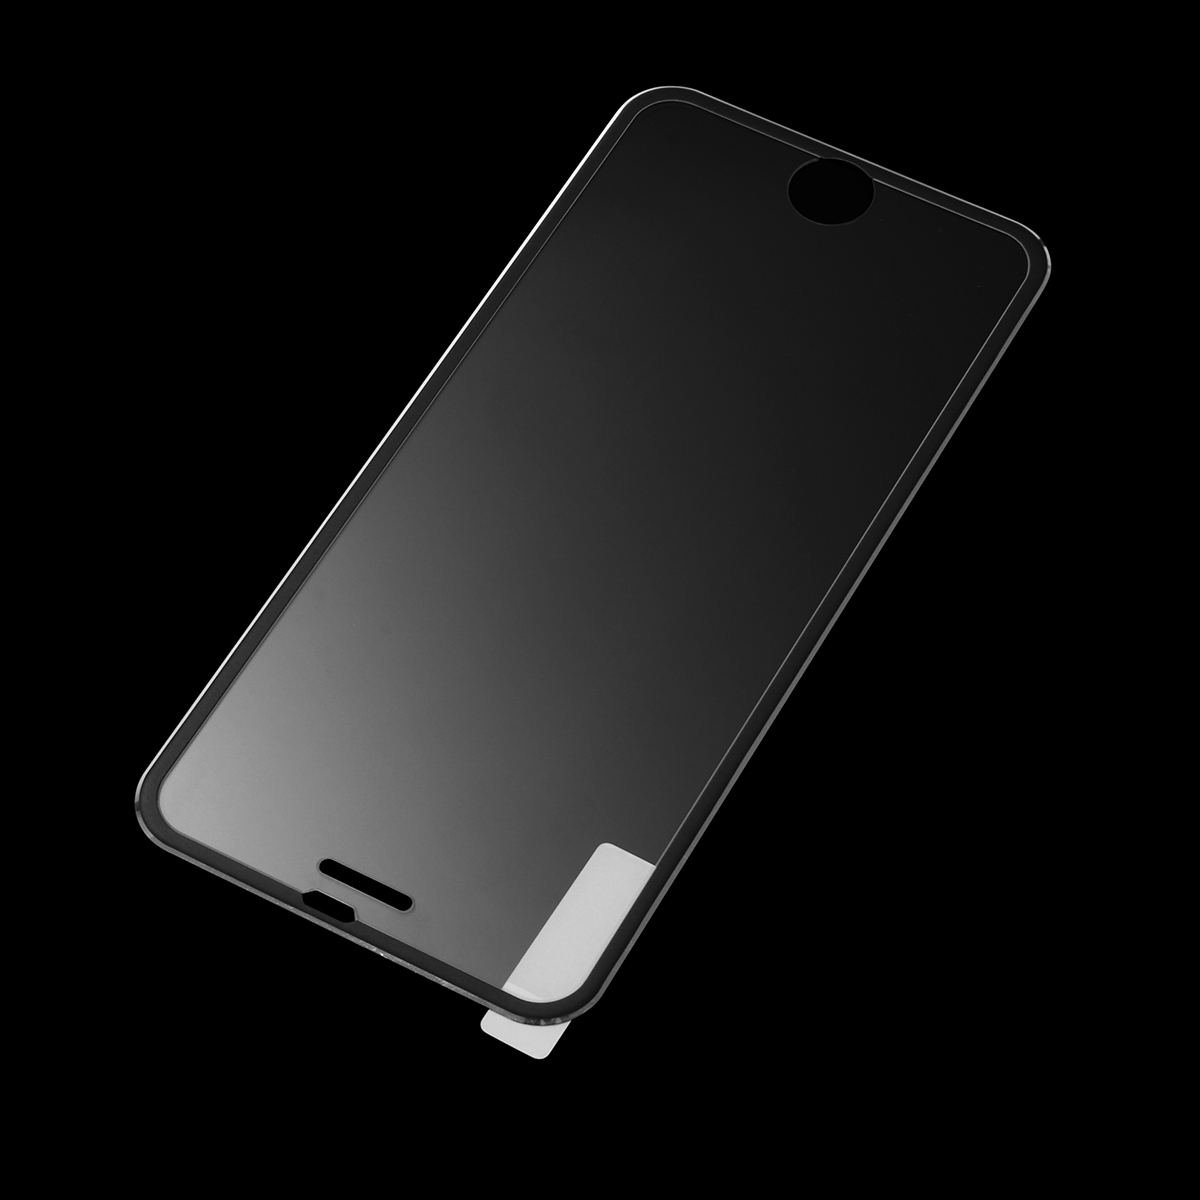 3D Tempered Glass Screen Protector Film with Curved Edge for iPhone 6/6s Plus - Black